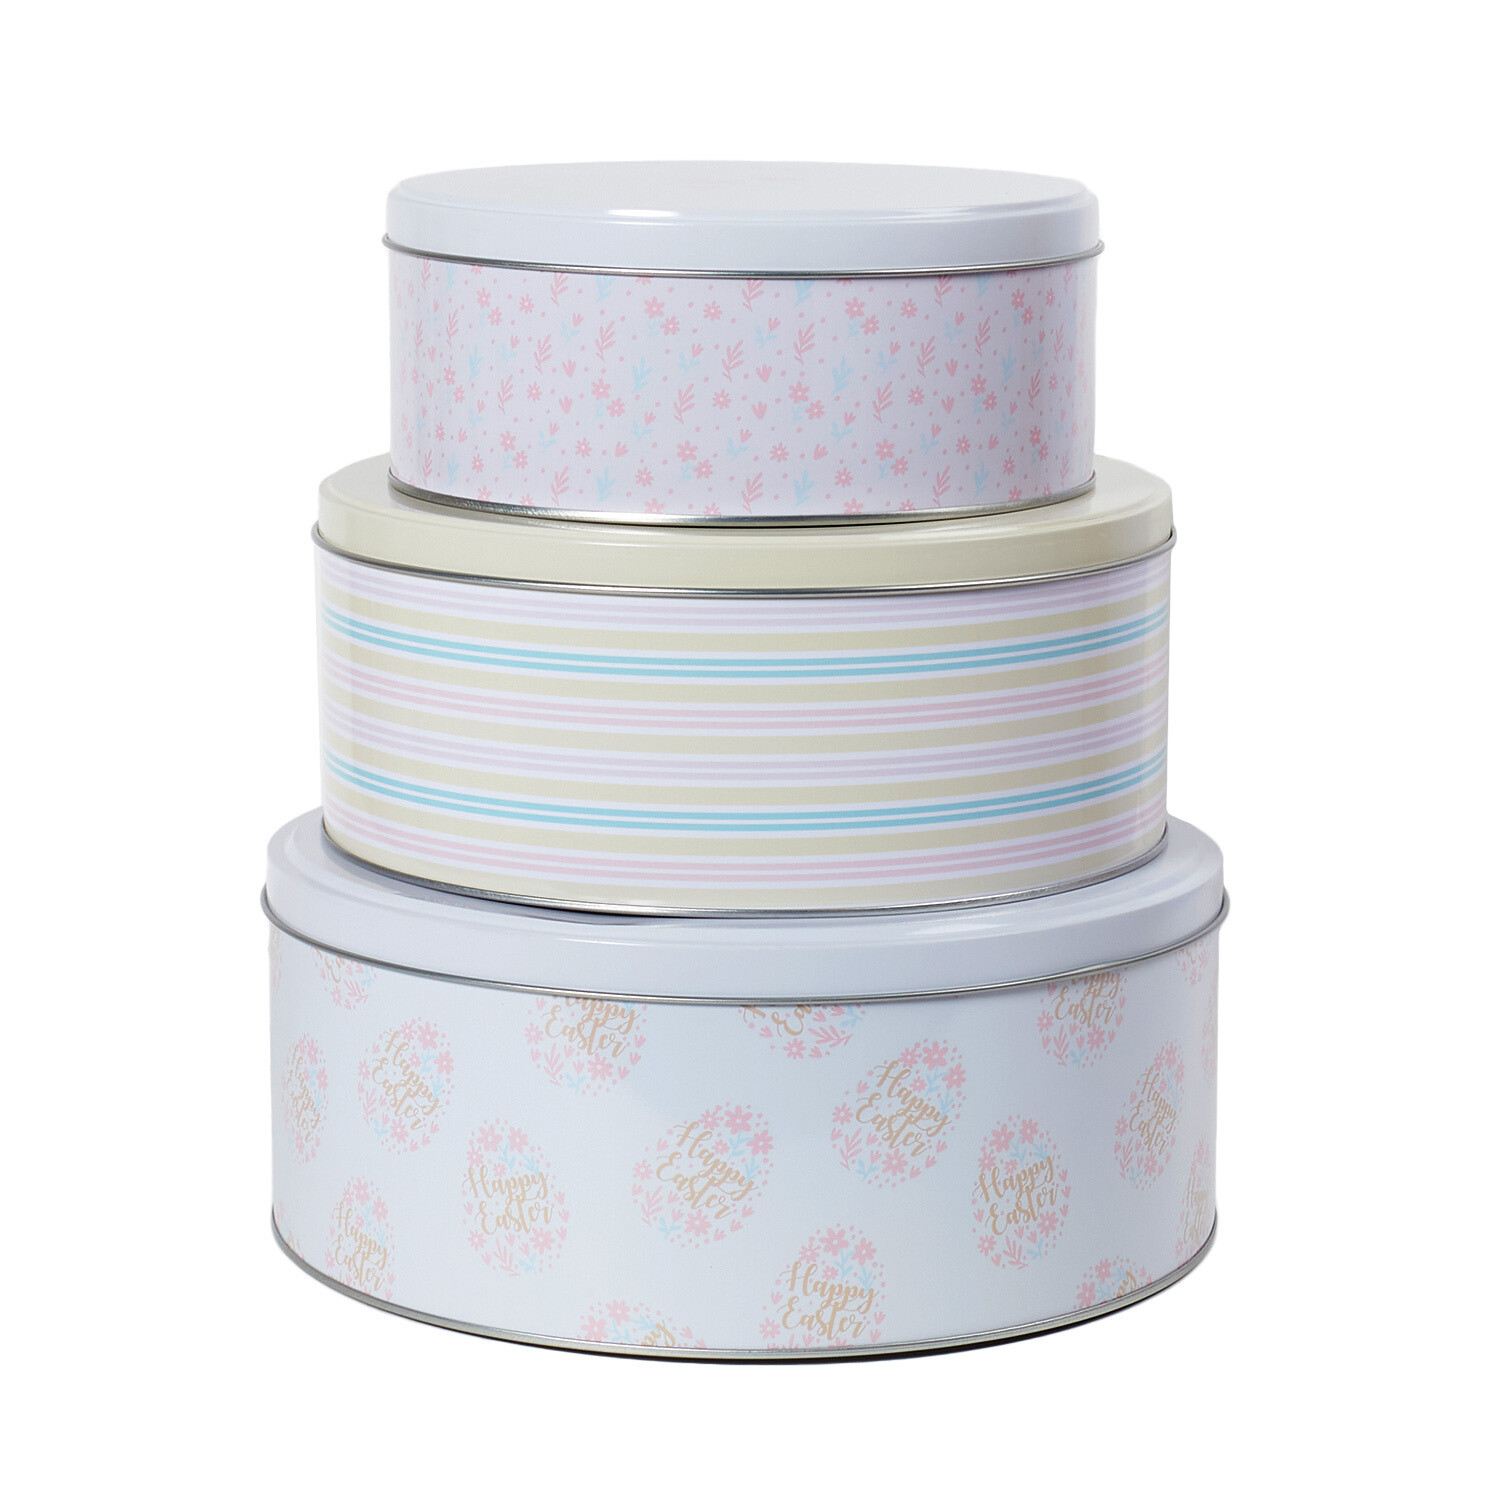 Pack of 3 Happy Easter Cake Tins - White Image 4